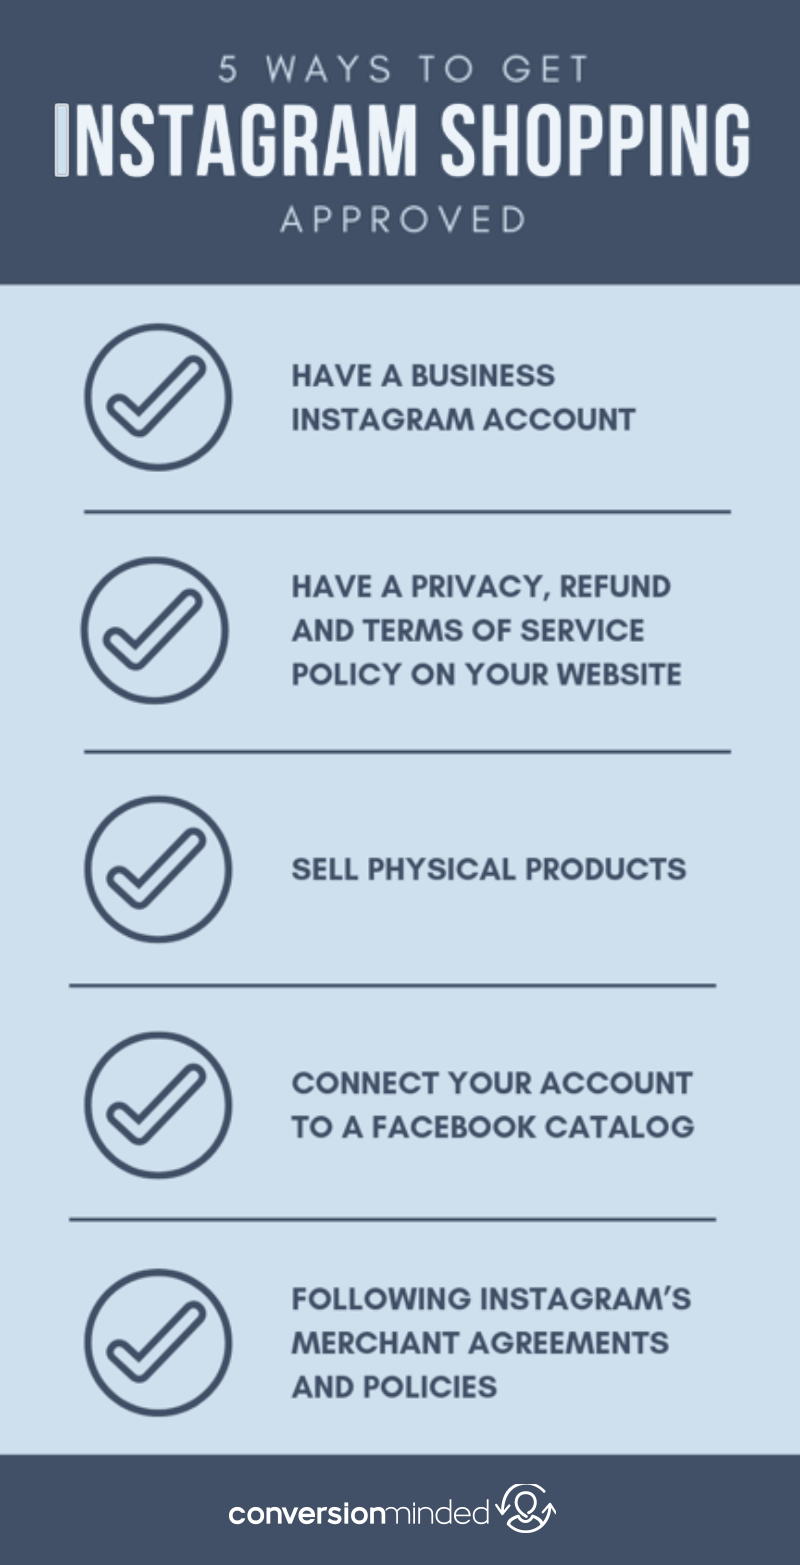 Want to enable Instagram Shopping on your posts? Follow this simple step-by-step guide. It includes everything you need to know to get started with Shoppable Posts on Instagram so you can sell more products.